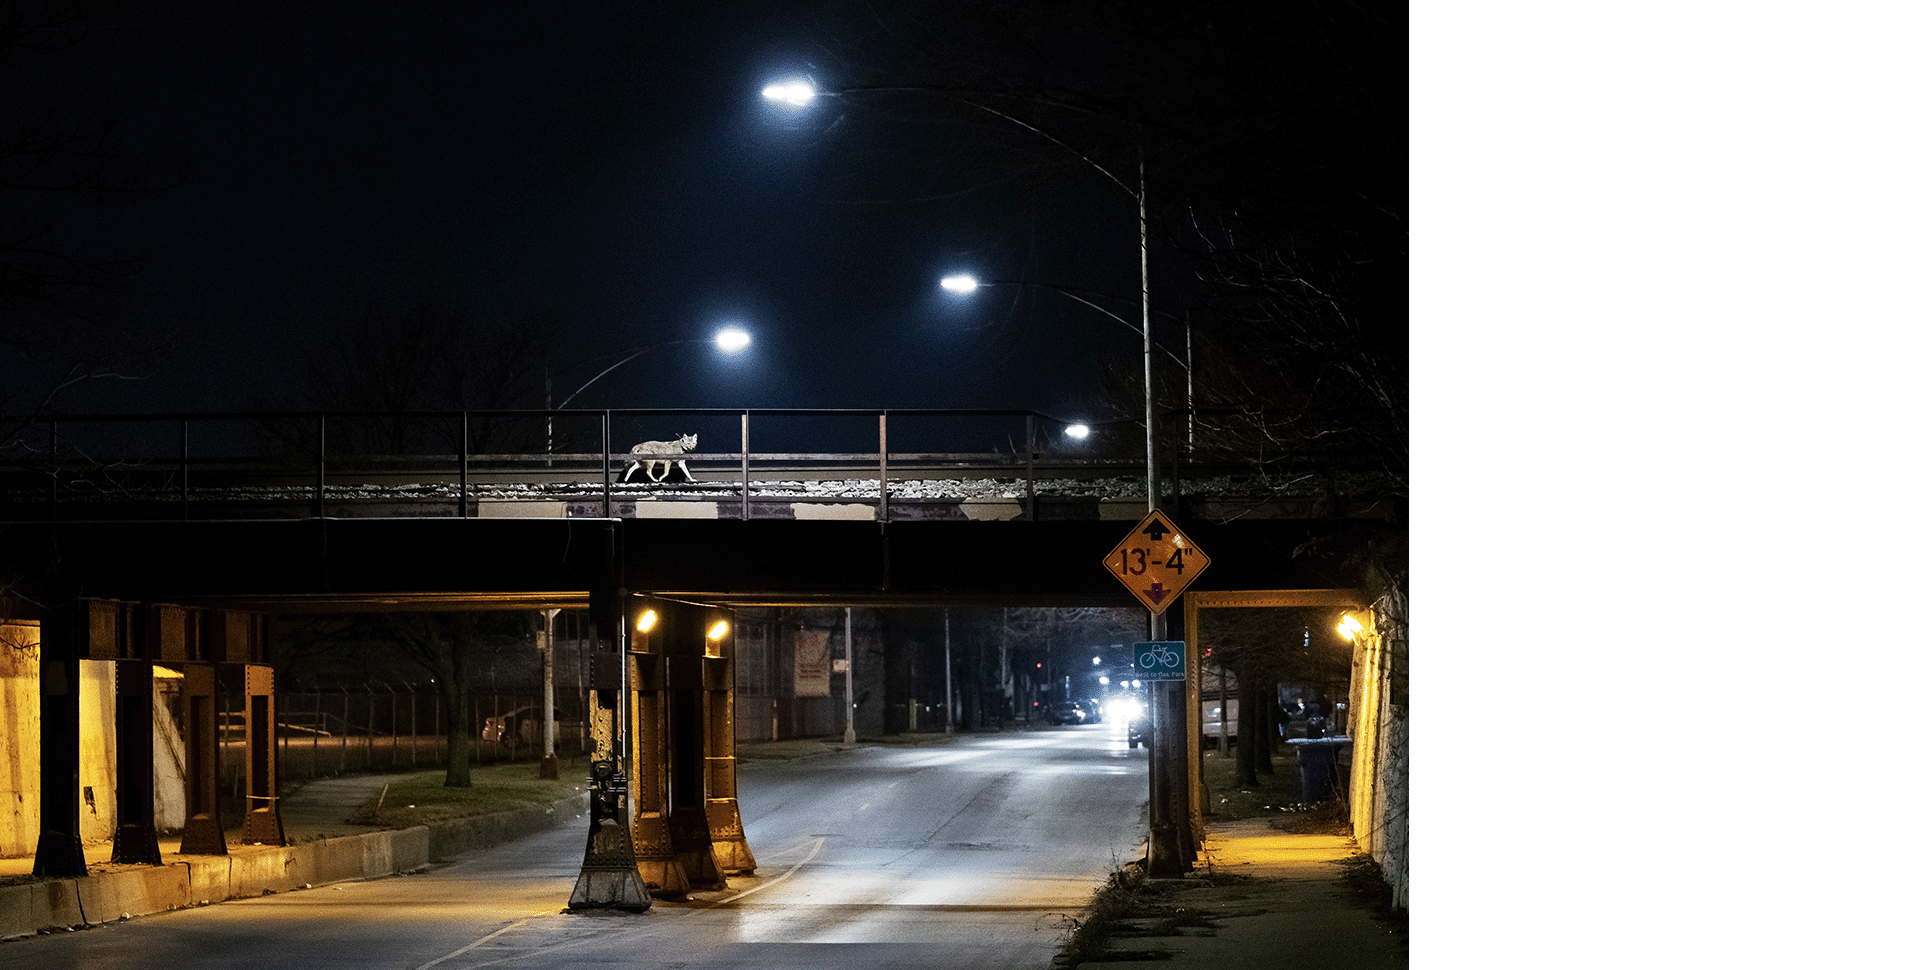 Coyote crossing a railroad trestle at night in Chicago. Photo by Corey Arnold